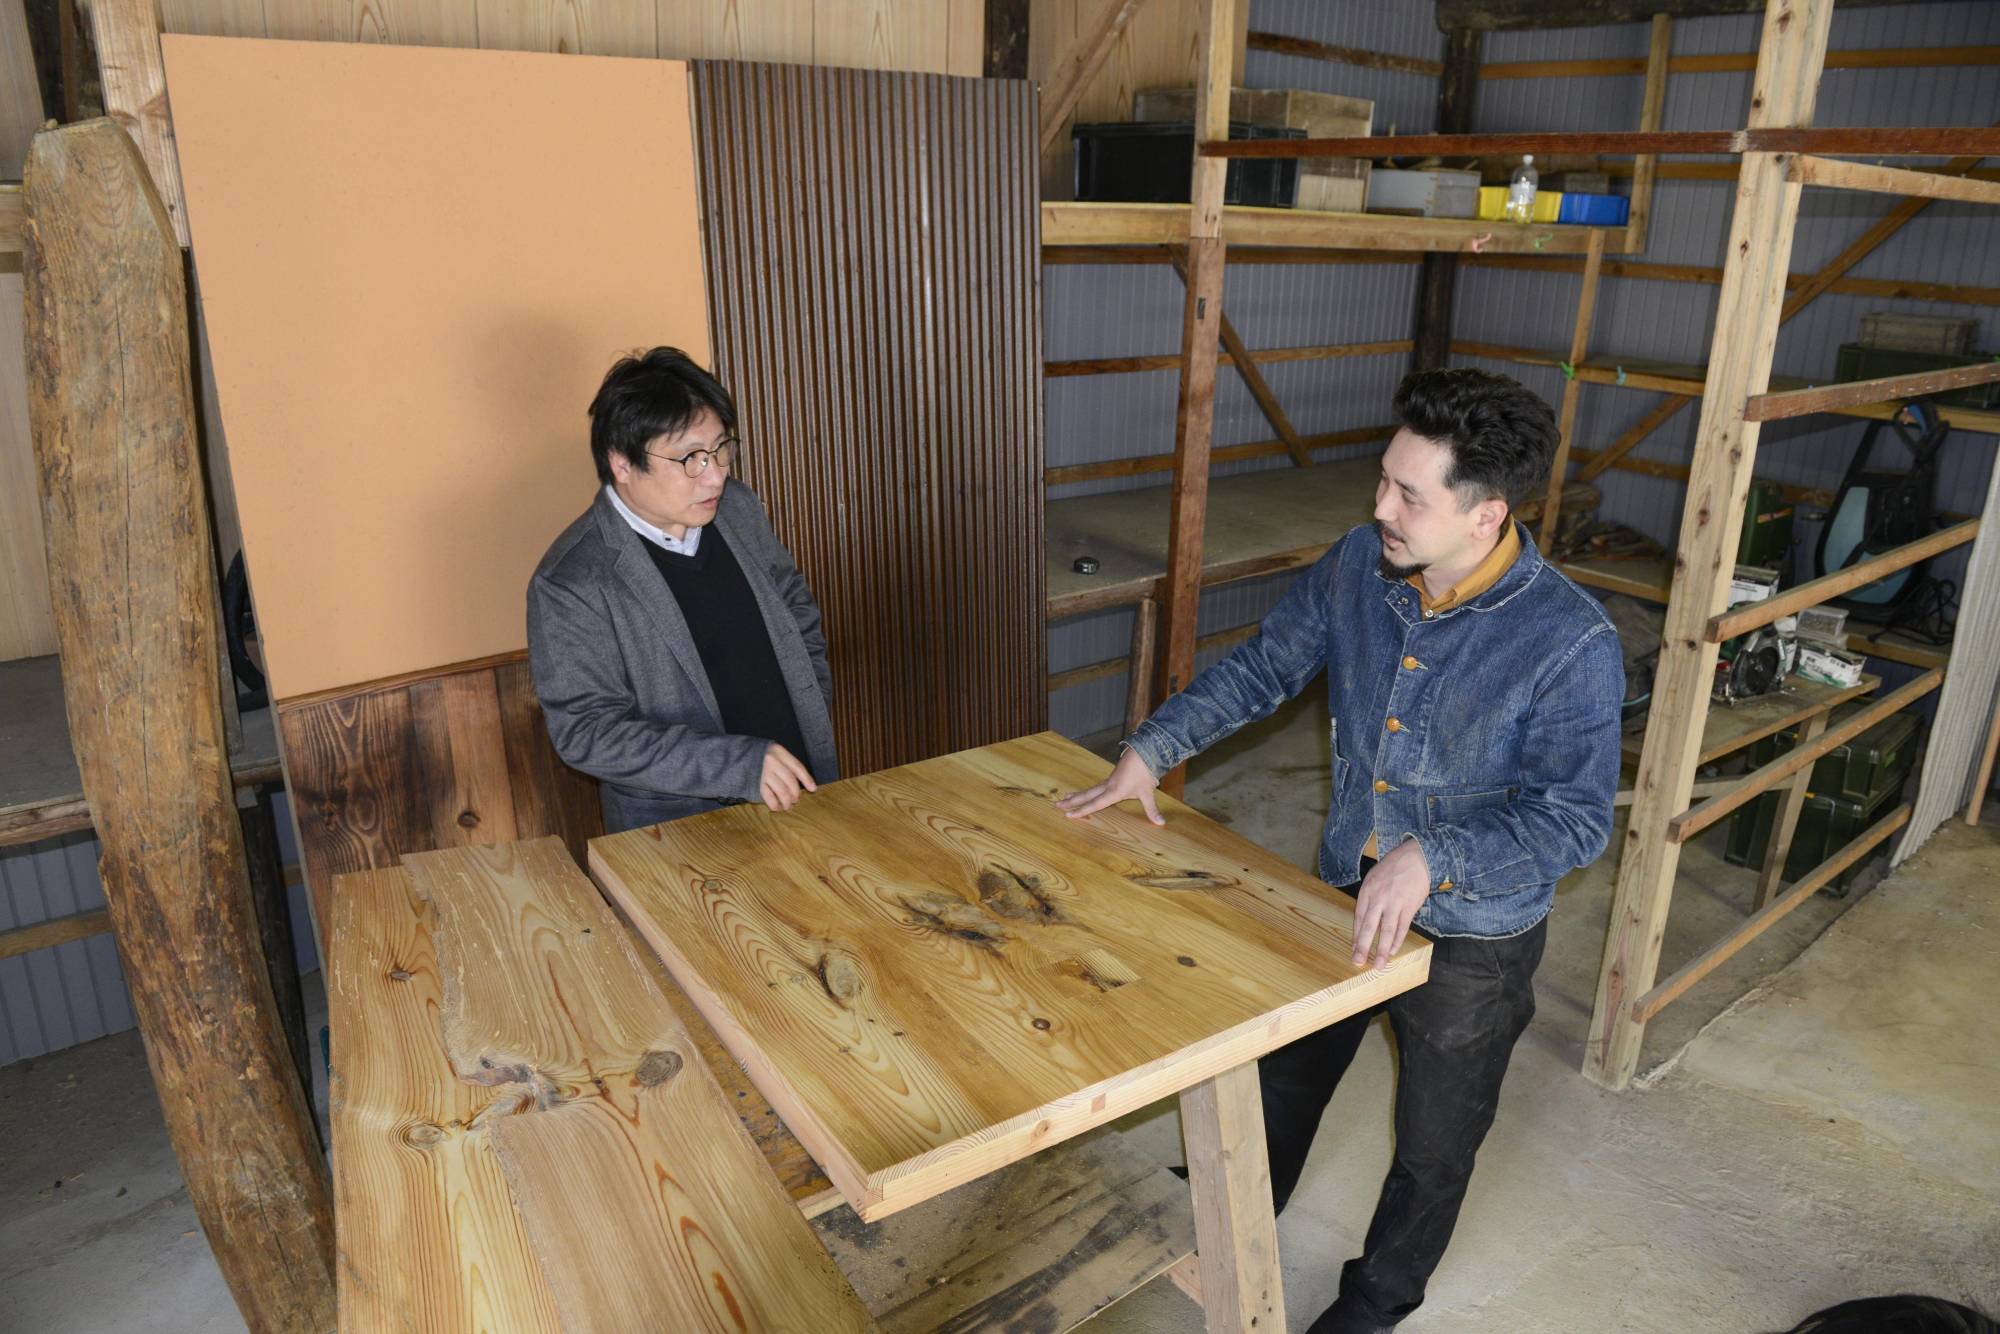 Motoki Moriyama (left) and Hajime Wilds discuss ideas for commercialization, such as creating panels from old wood, in Shimane Prefecture on March 29. | KYODO